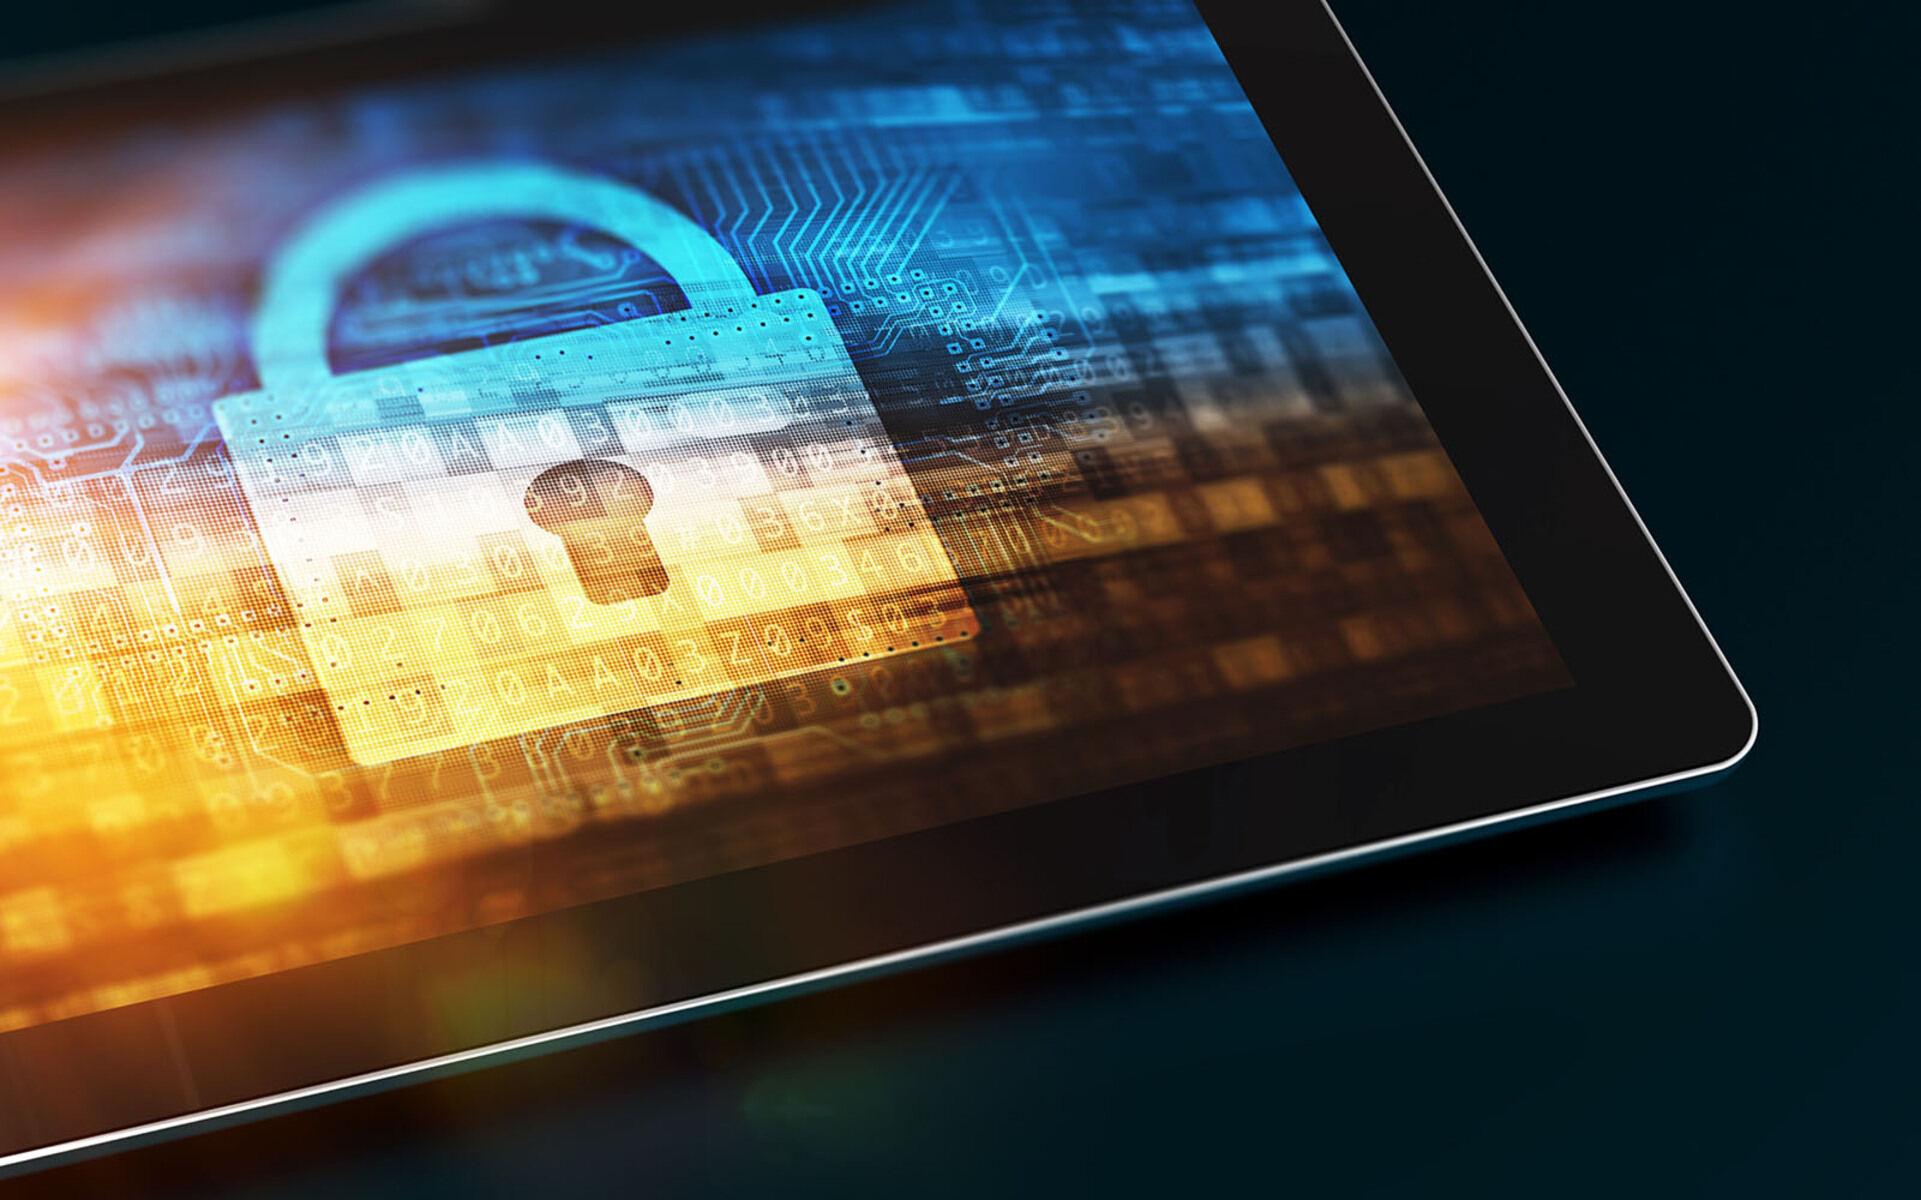 What Can Encryption Technology Perform